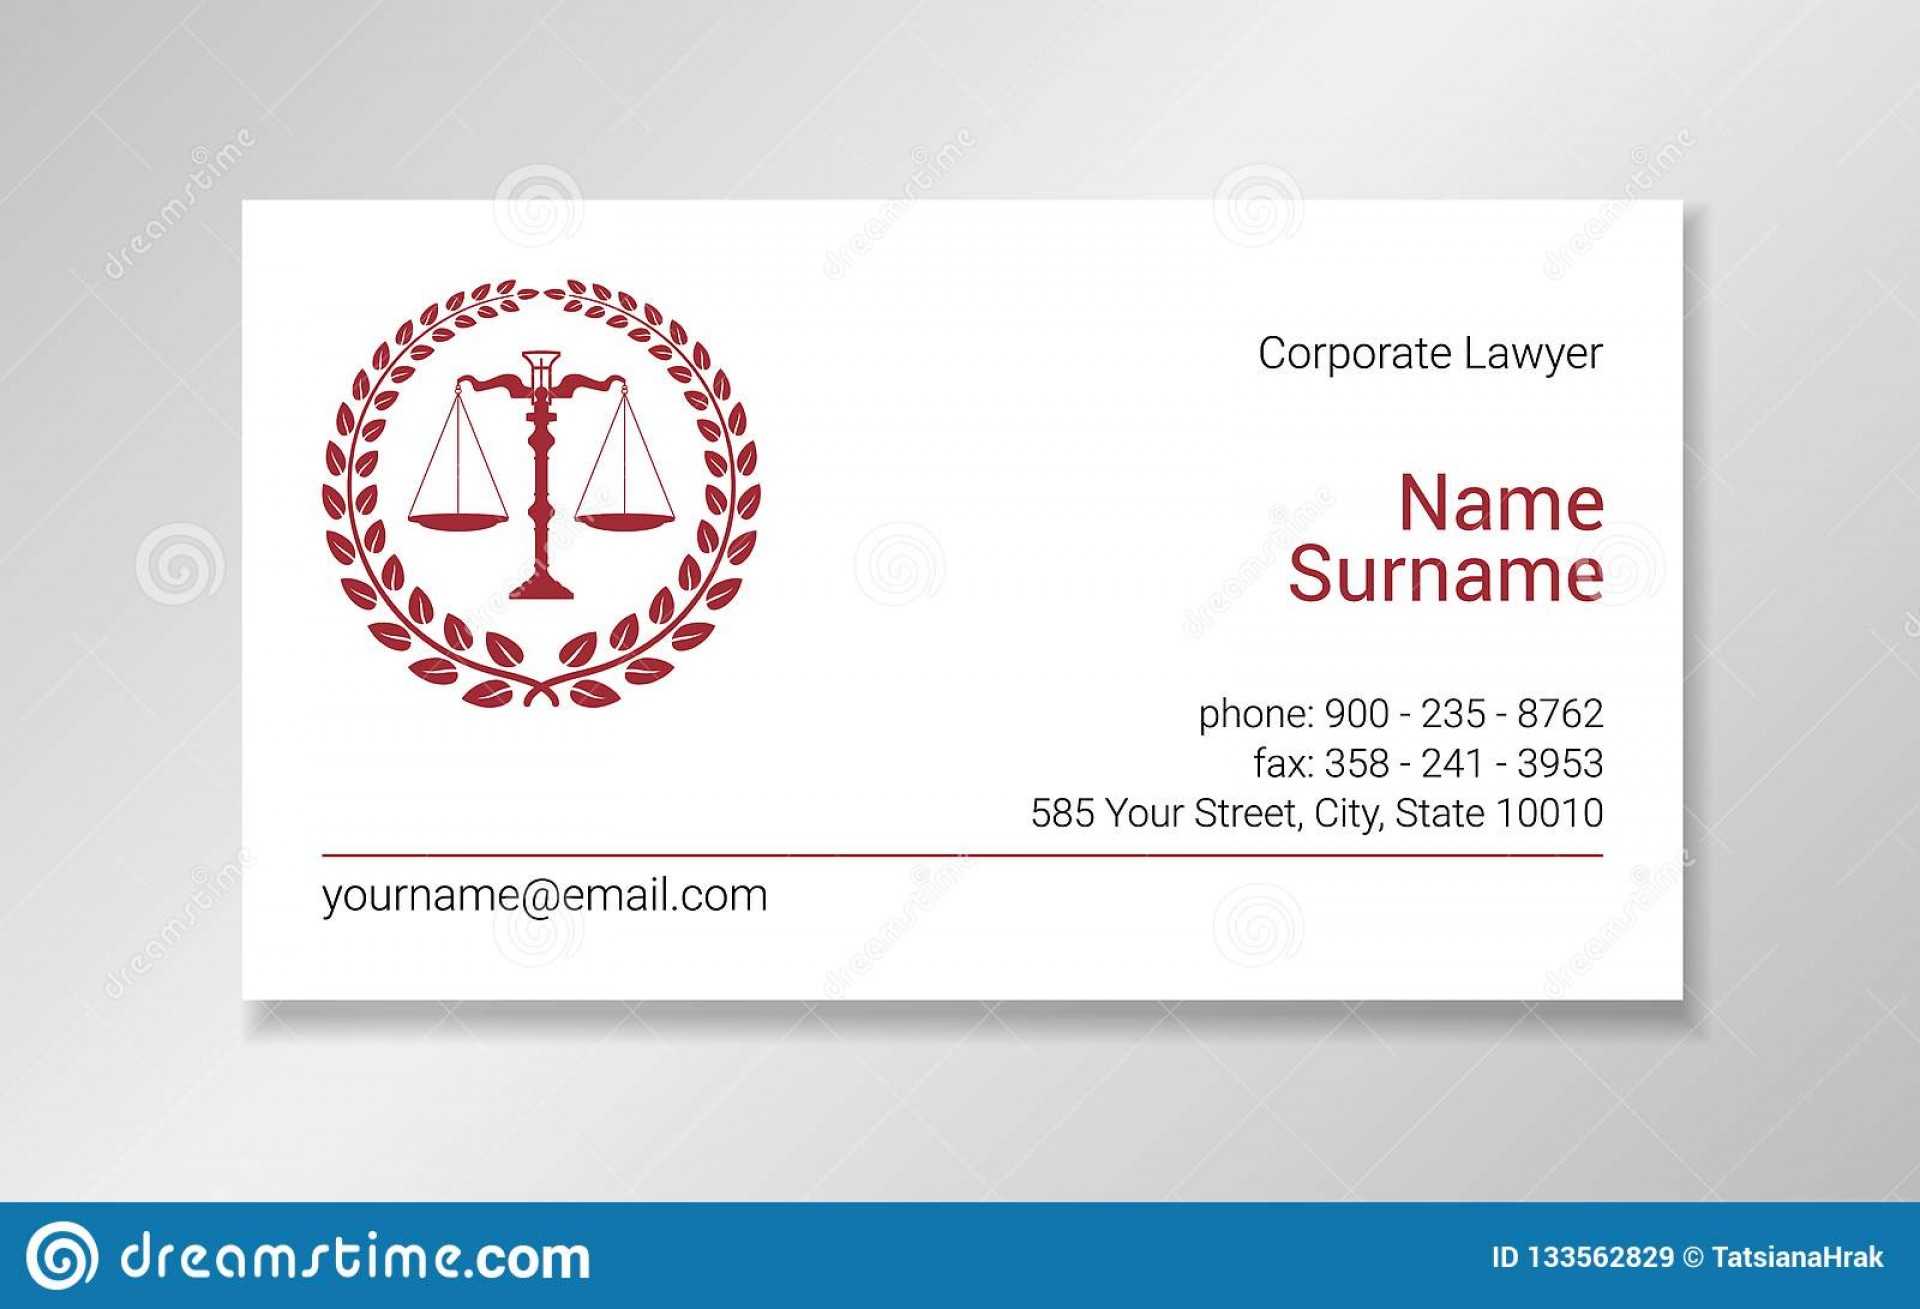 004 Lawyer Business Cards Templates Free Download Template With Regard To Lawyer Business Cards Templates